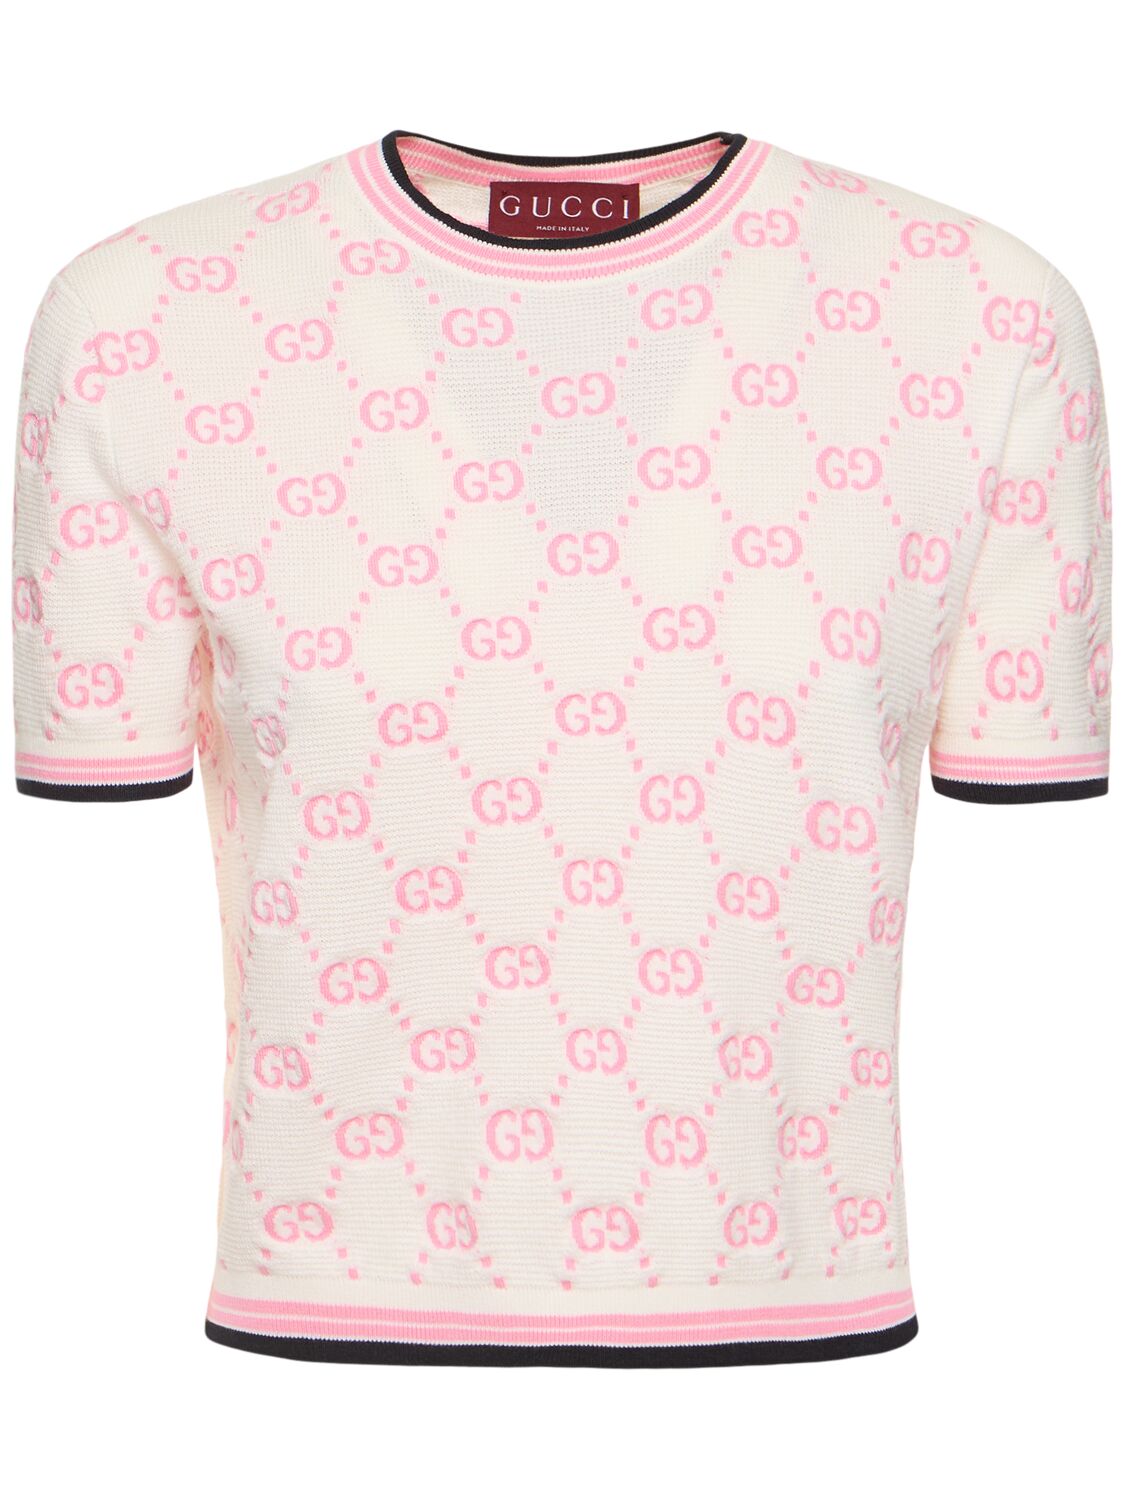 Gucci Gg Cotton Top In Ivory/pink